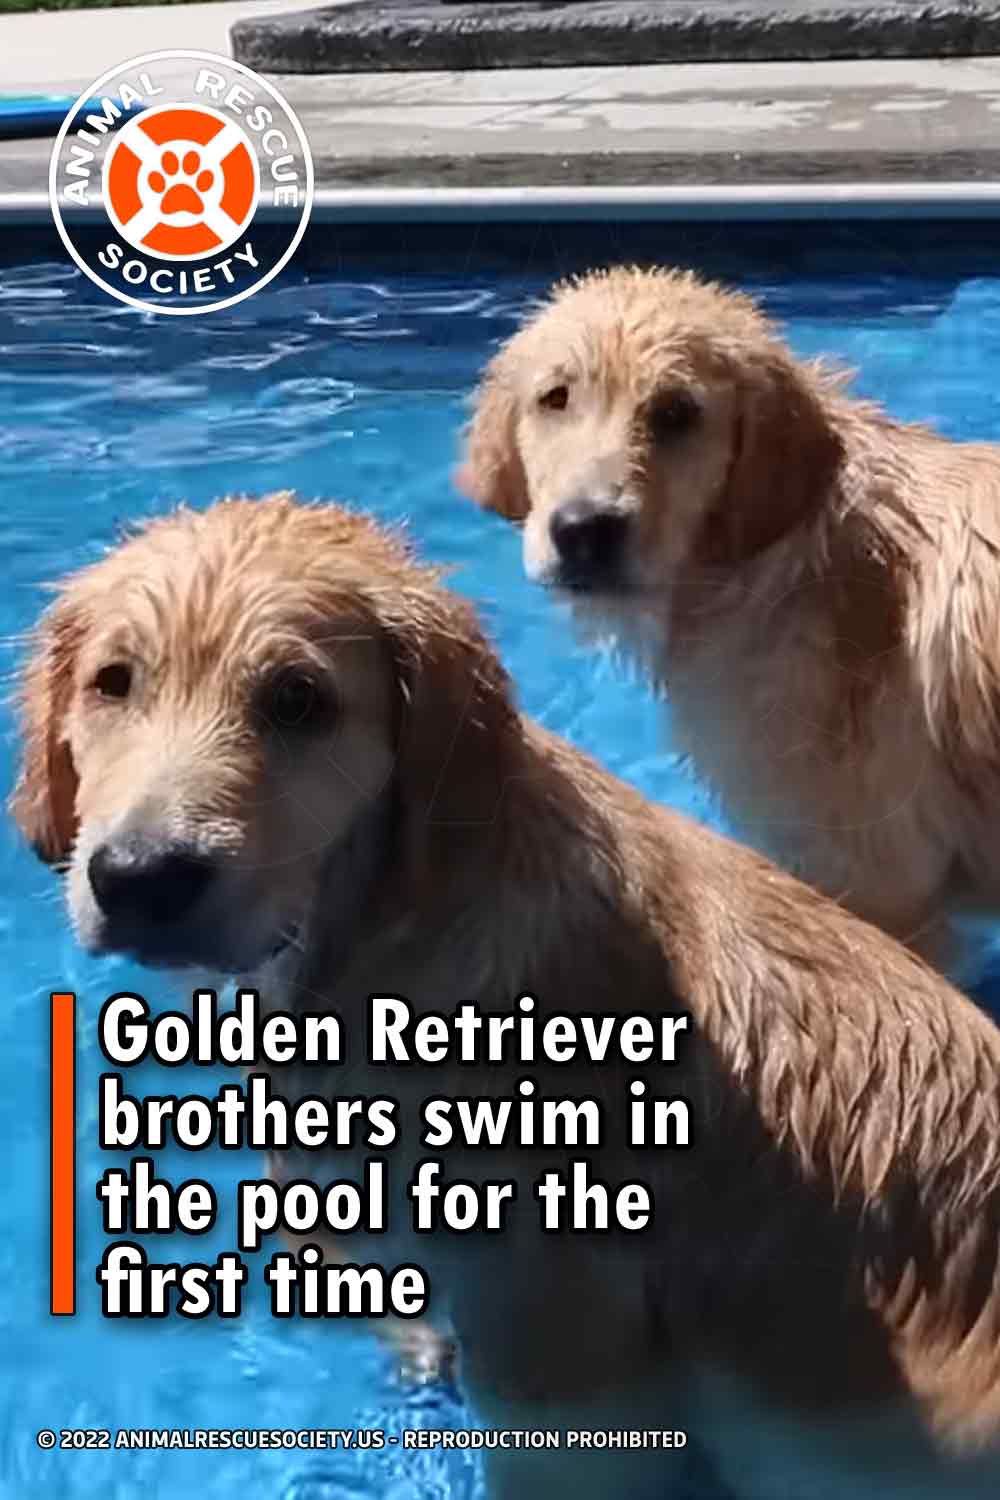 Golden Retriever brothers swim in the pool for the first time